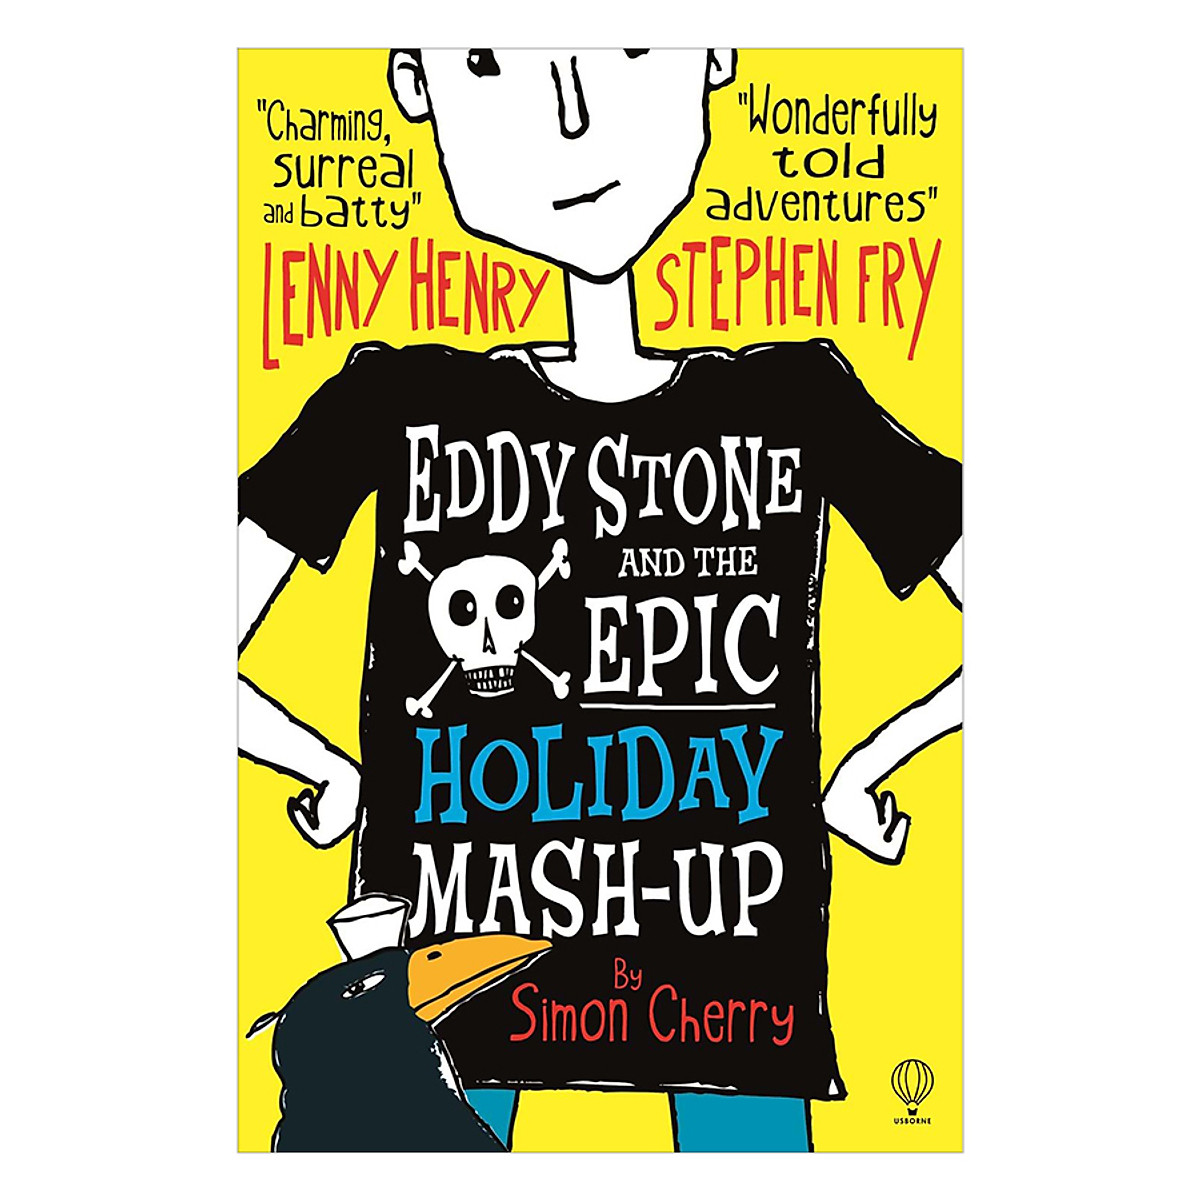 Truyện đọc tiếng Anh - Usborne Middle Grade Fiction: Eddy Stone and the Epic Holiday Mash-Up